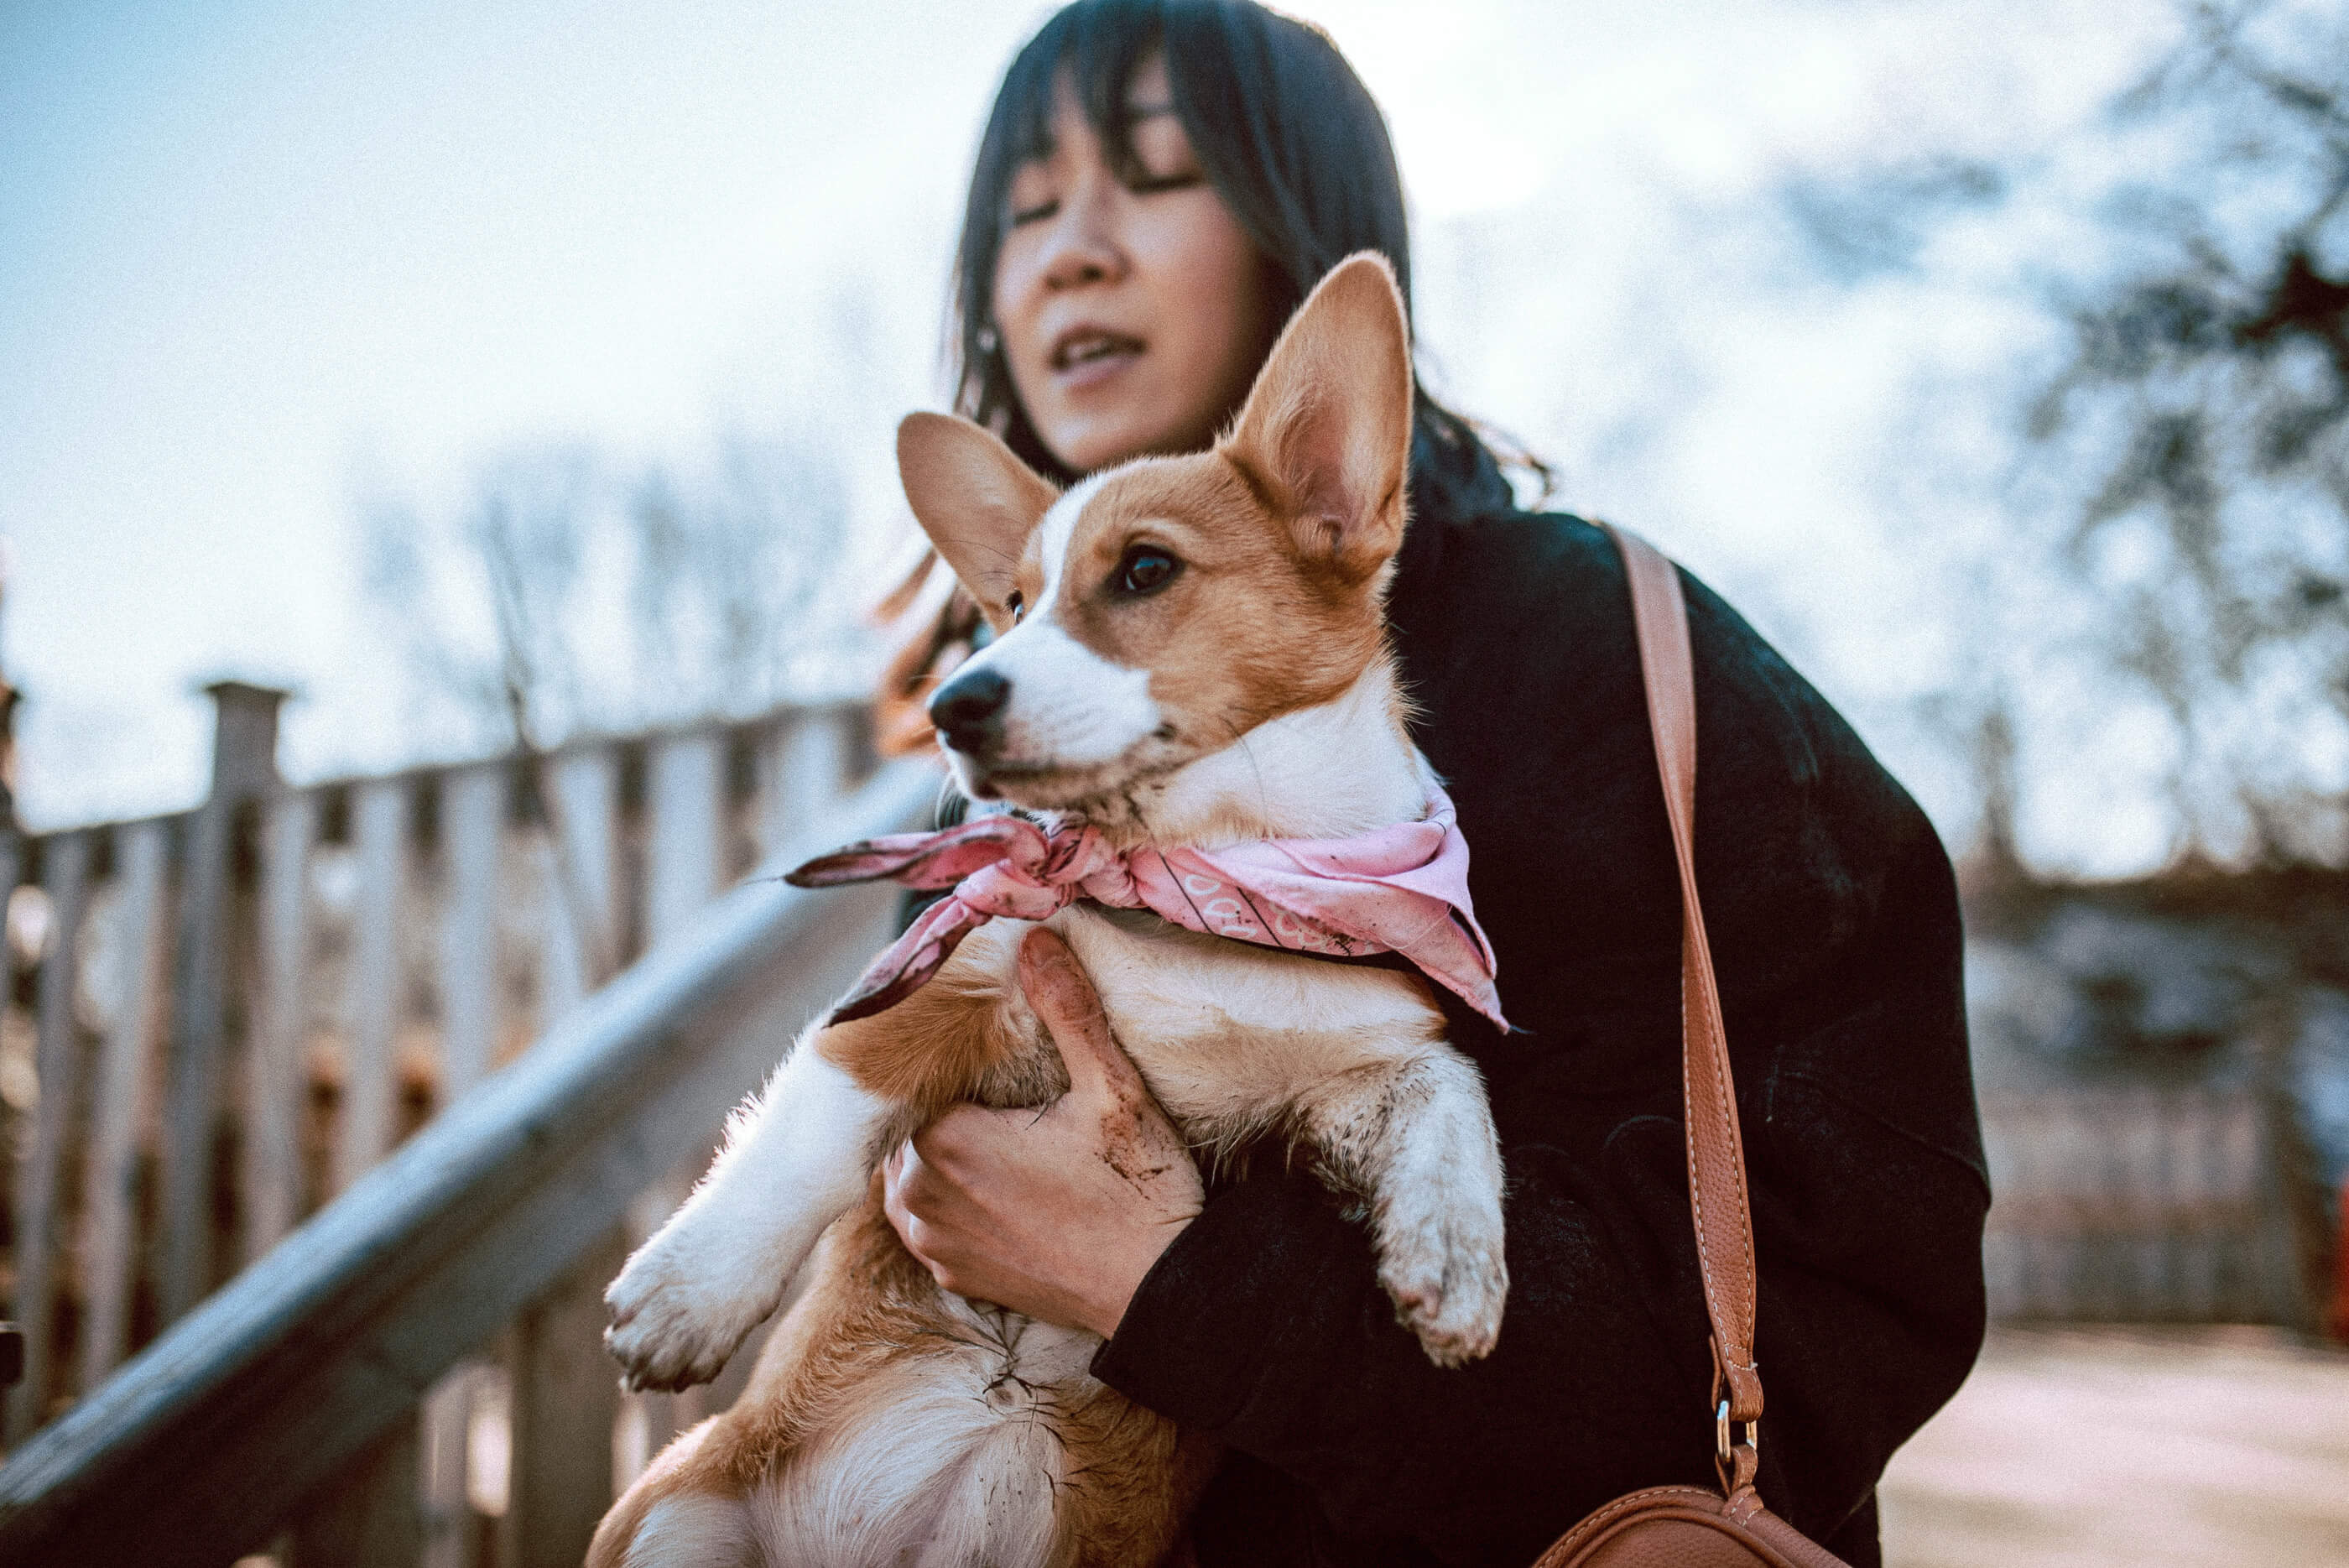 Limone, a red and white corgi, wearing a muddy pink bandana is held in Maria's arm. Image is taken atop the viewing platform at the Dog Bowl at Trinity Bellwoods Park